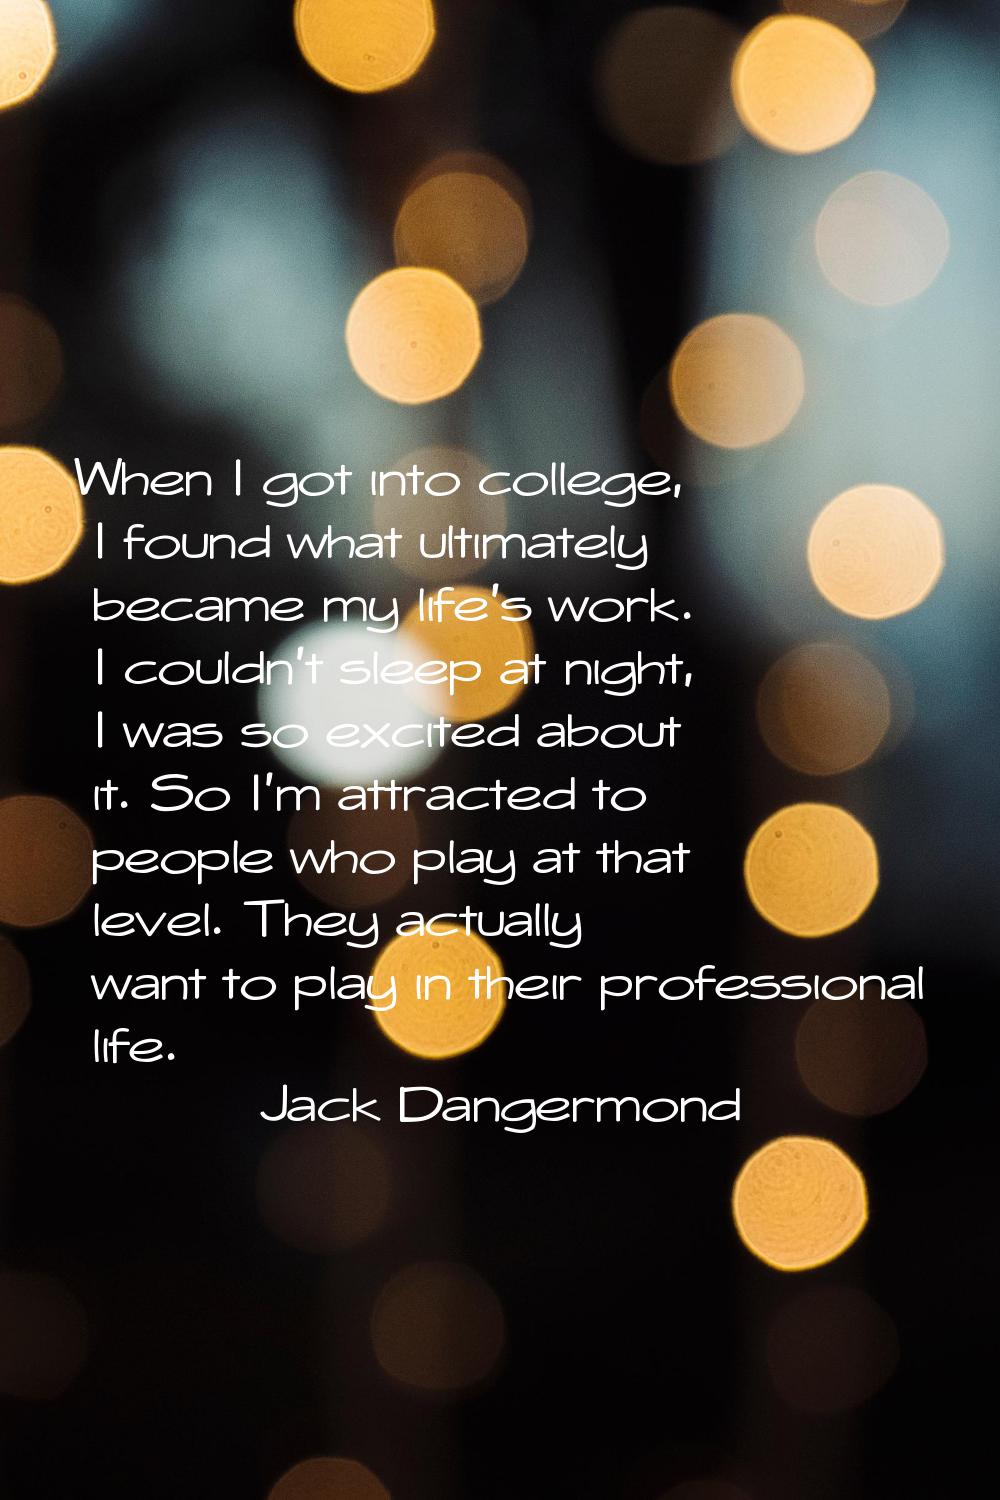 When I got into college, I found what ultimately became my life's work. I couldn't sleep at night, 